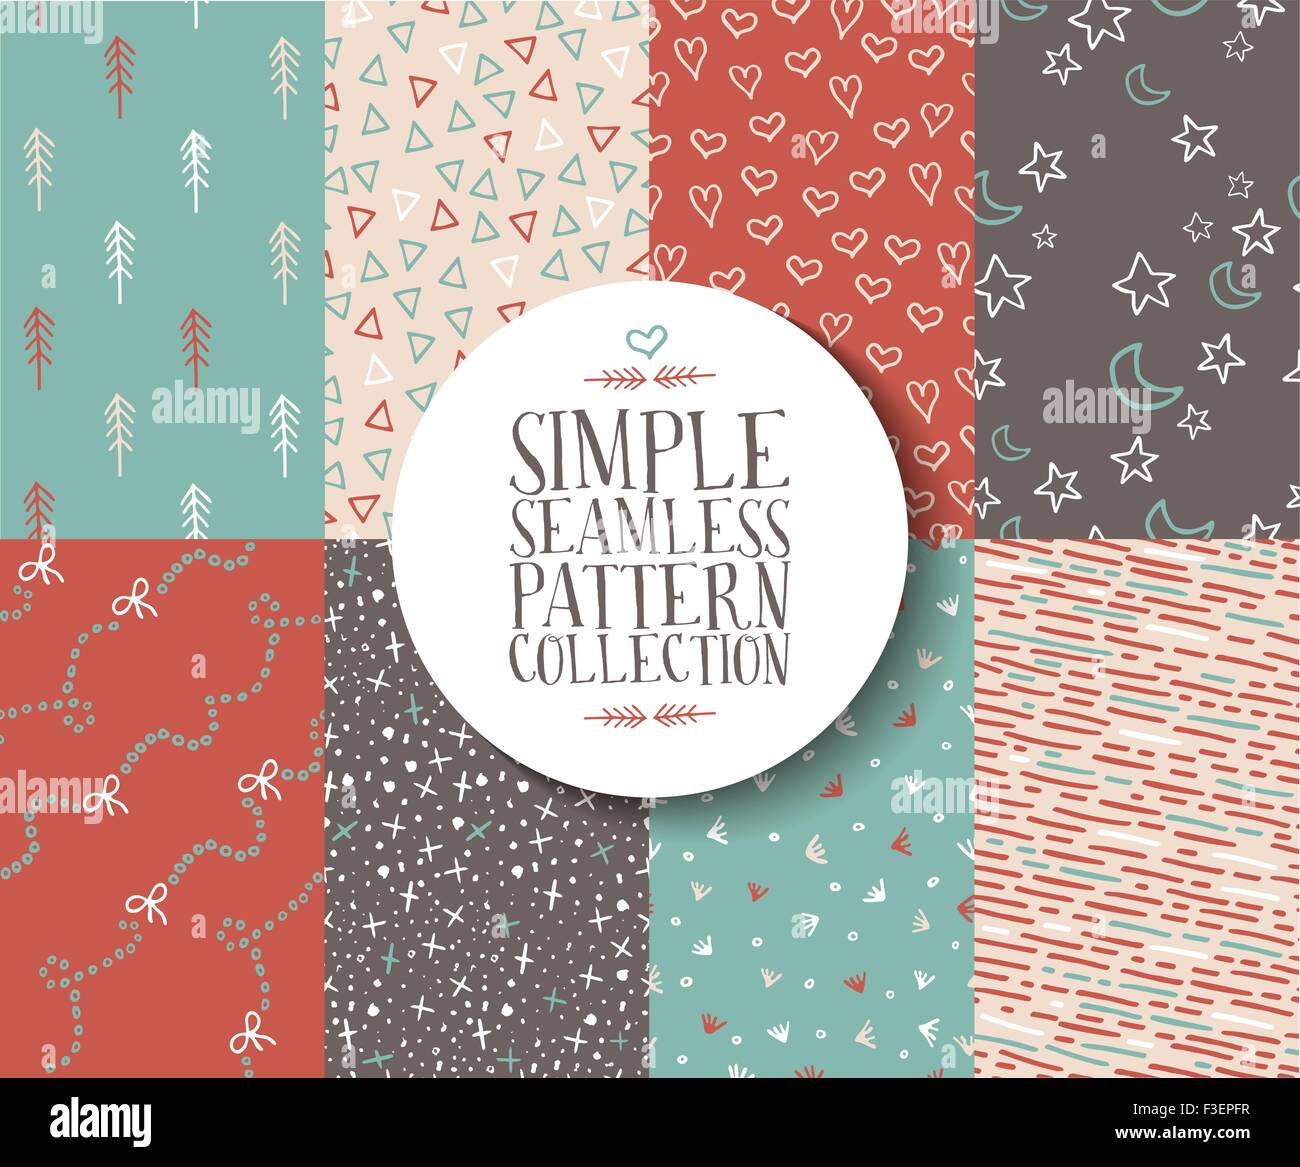 Simple seamless pattern collection of vintage hipster style hand drawn elements in soft colors. EPS10 vector. Stock Vector